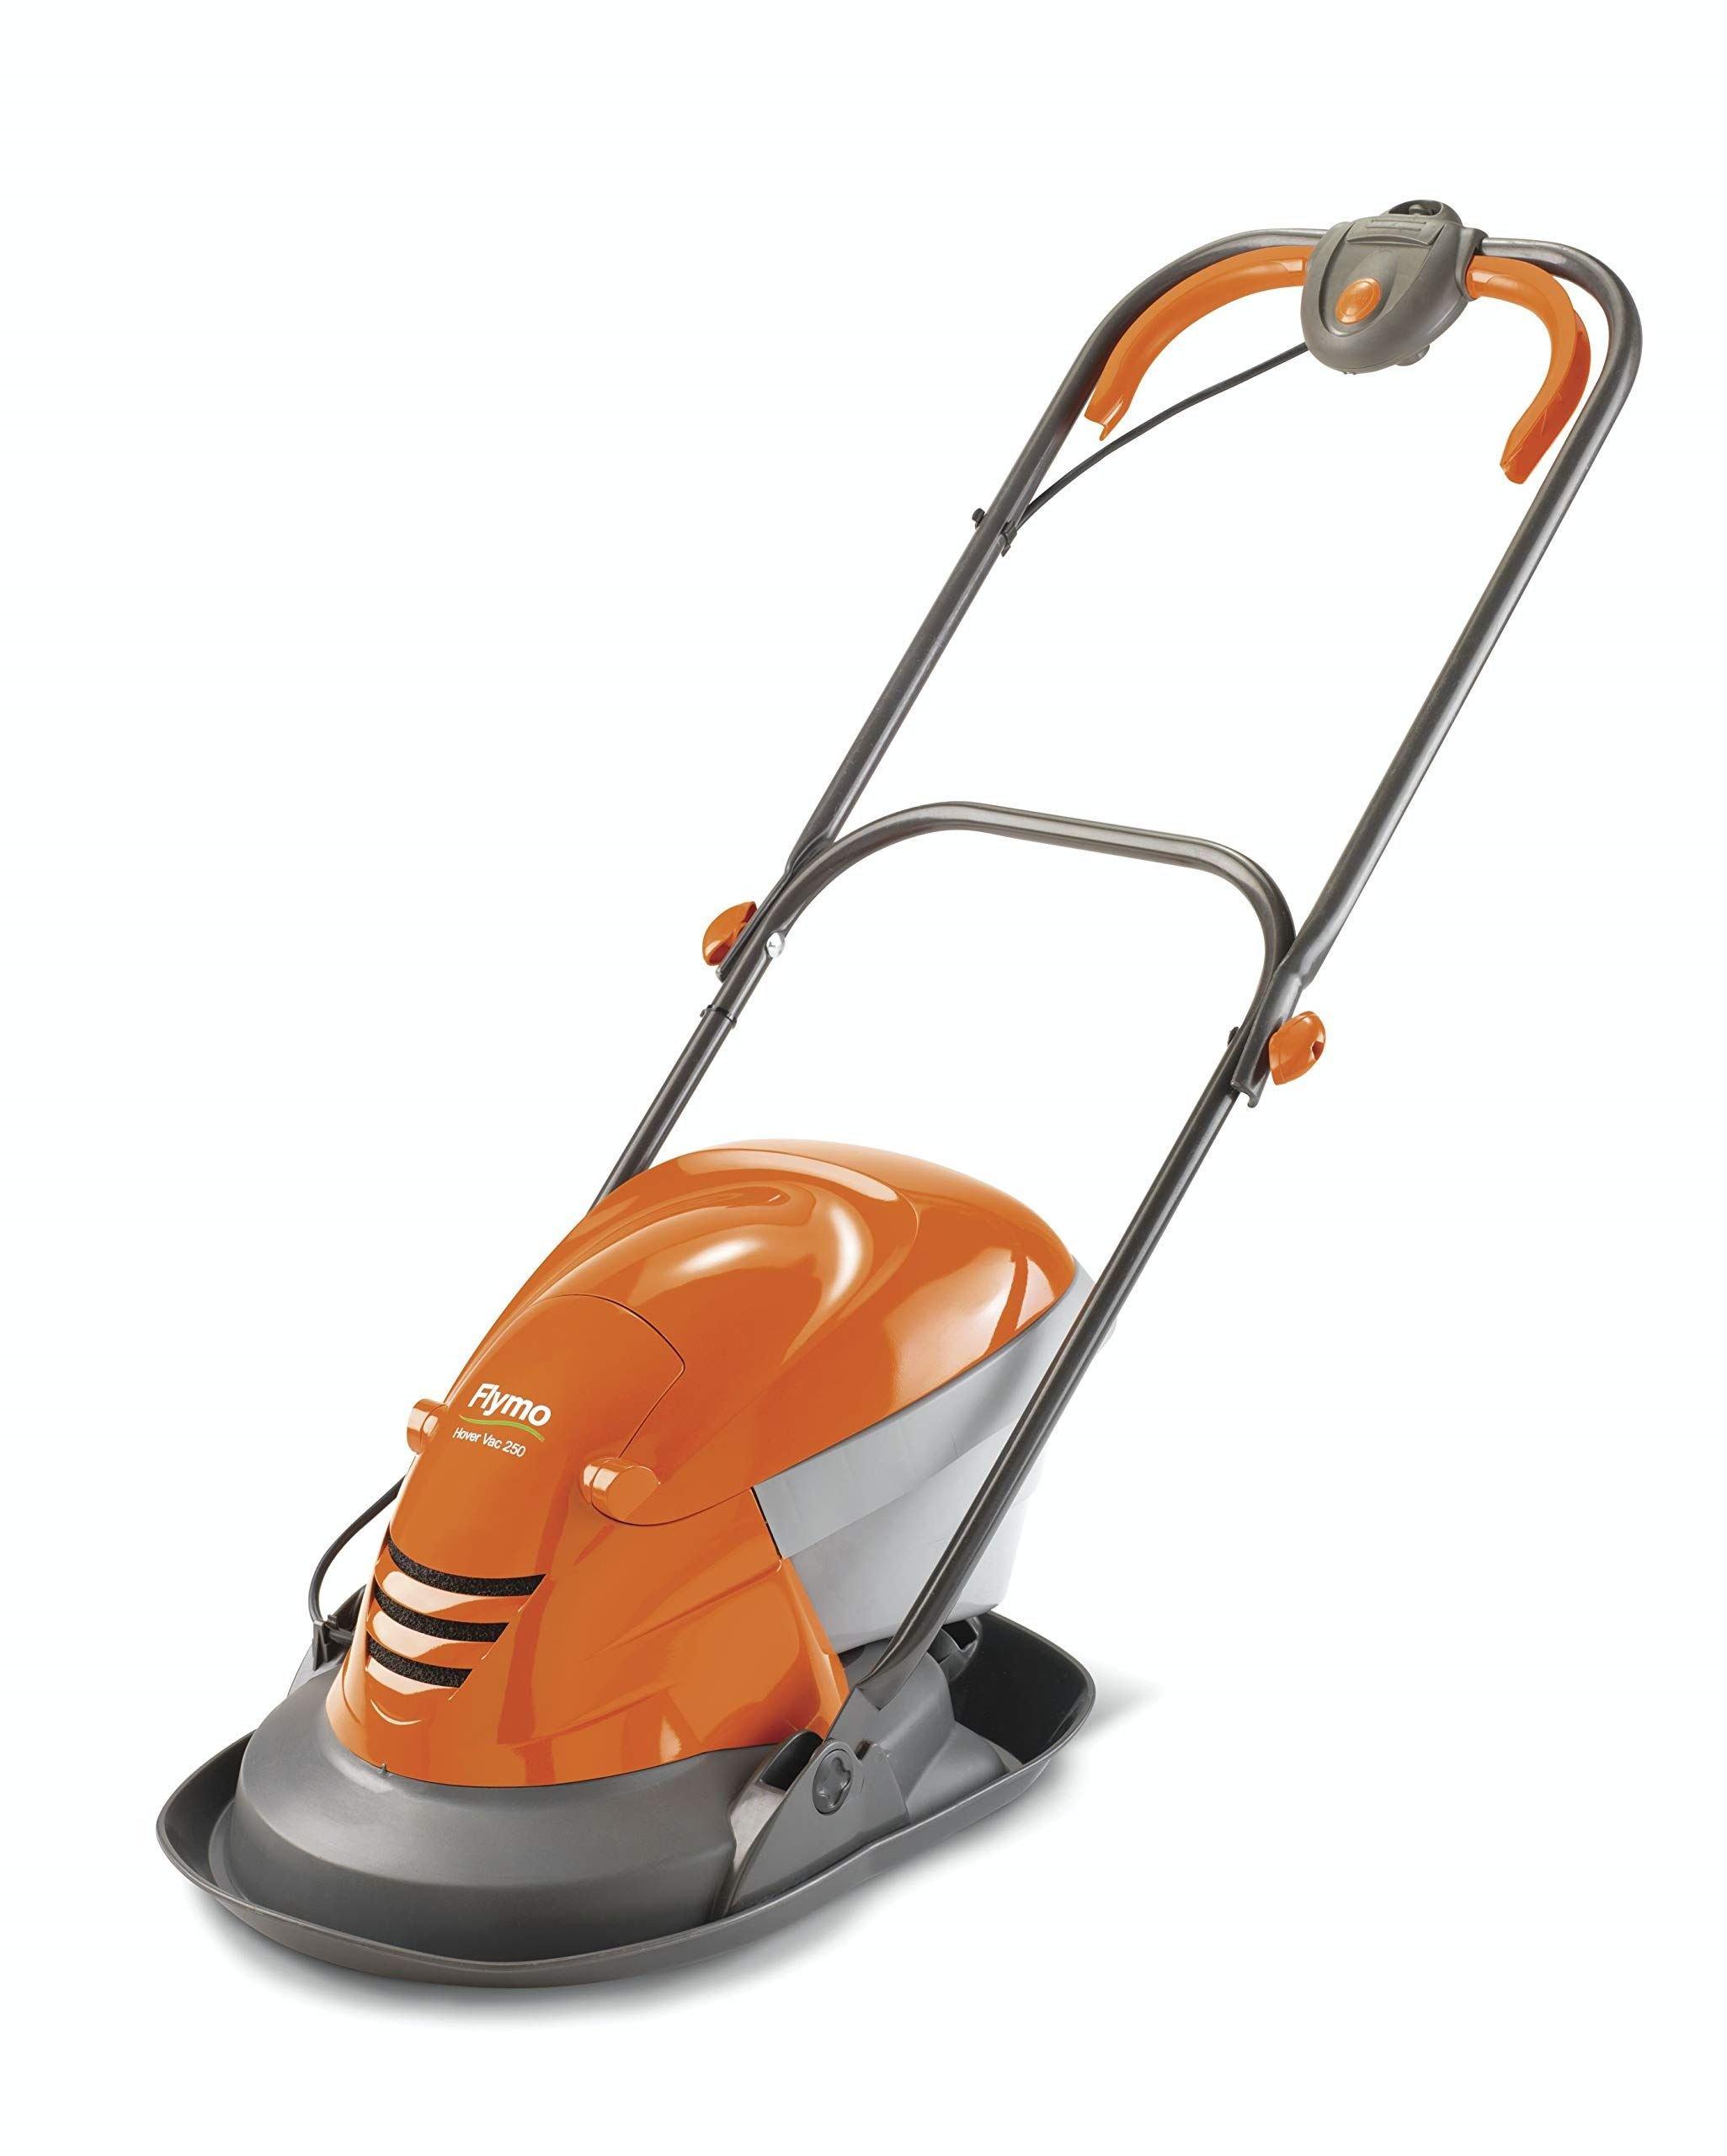 HoverVac 250 Electric Hover Collect Lawn Mower